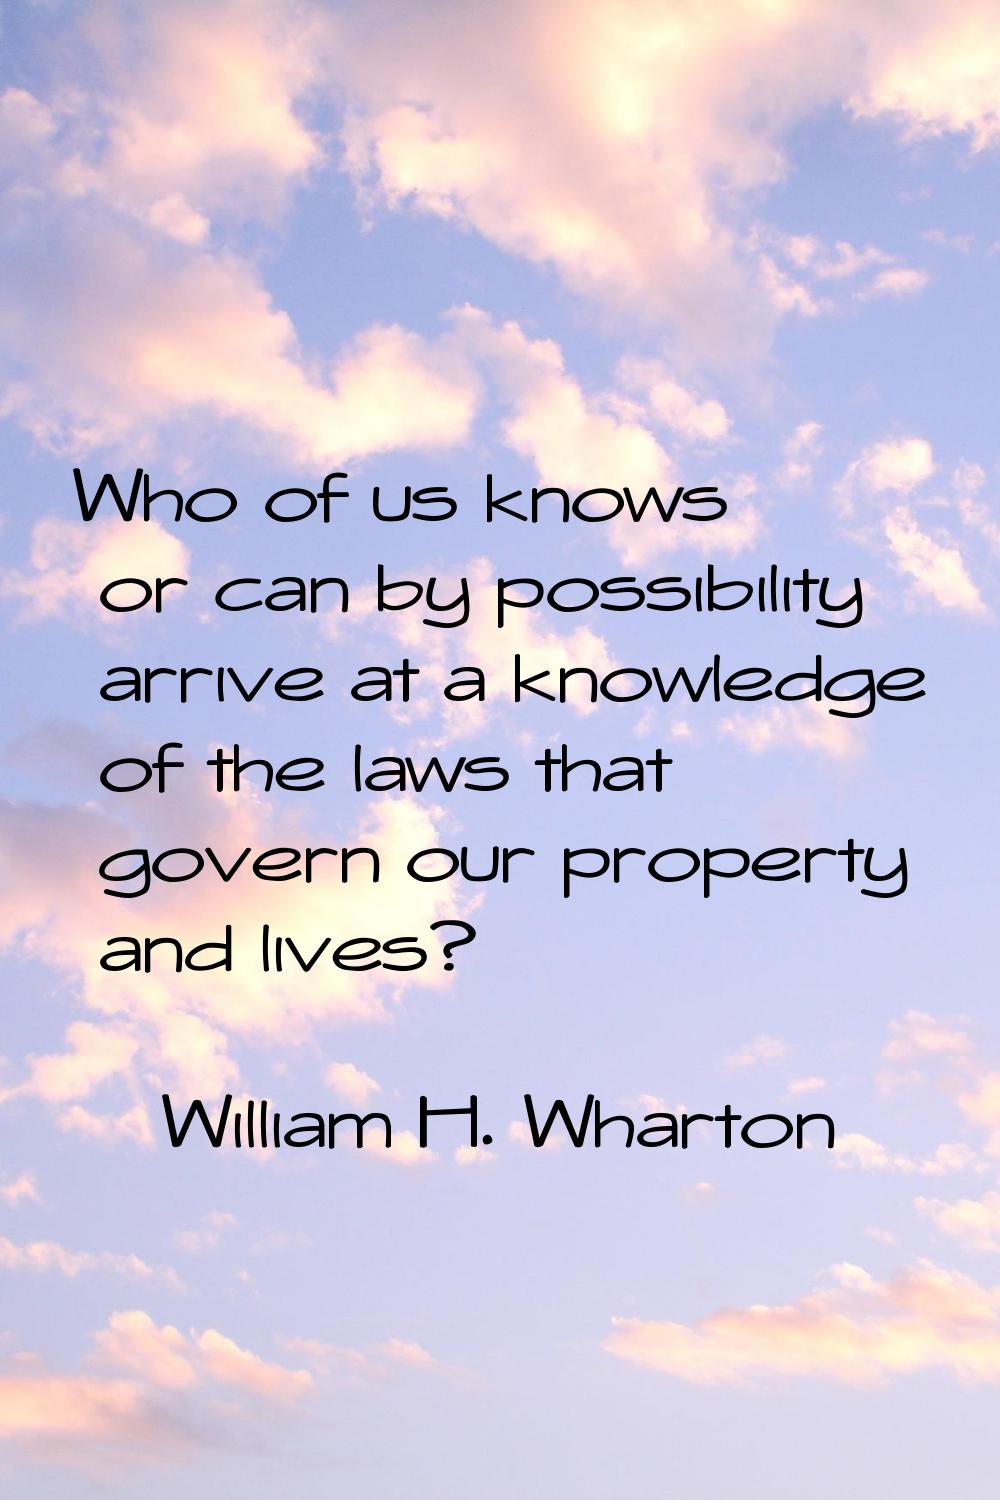 Who of us knows or can by possibility arrive at a knowledge of the laws that govern our property an